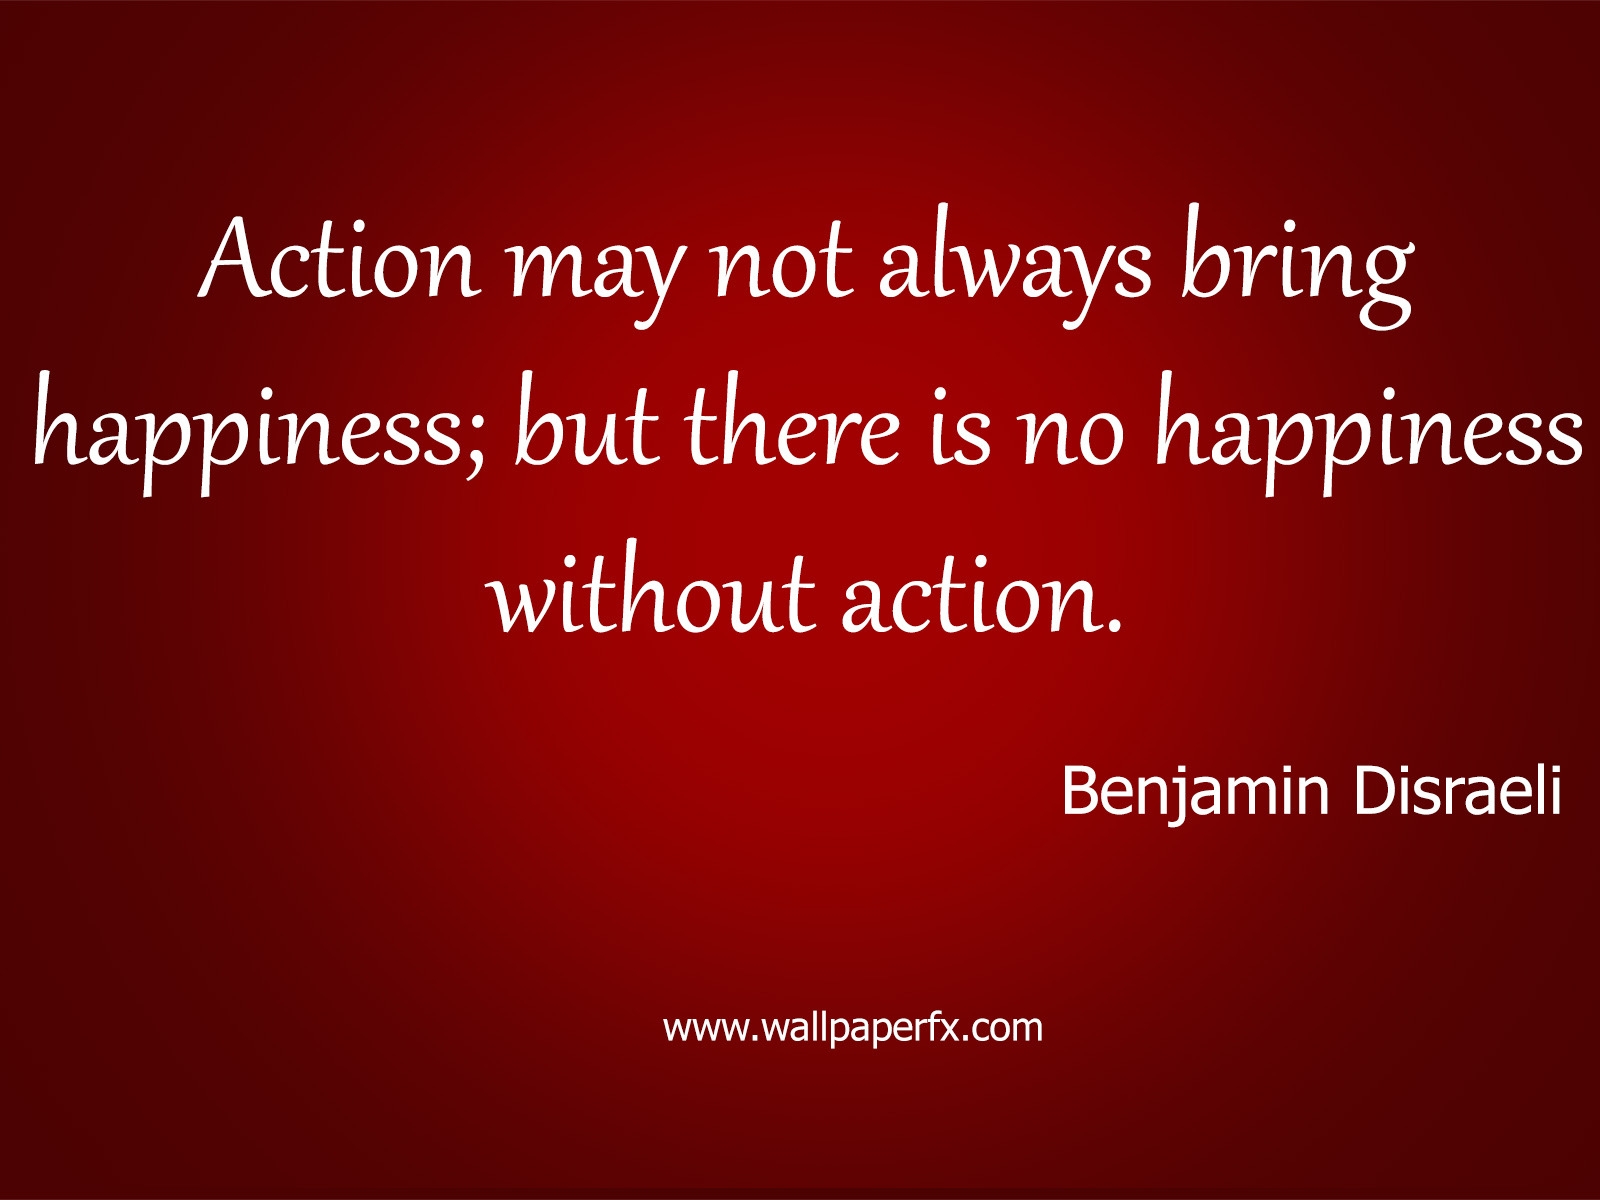 Benjamin Disraeli Happiness Quote for 1600 x 1200 resolution